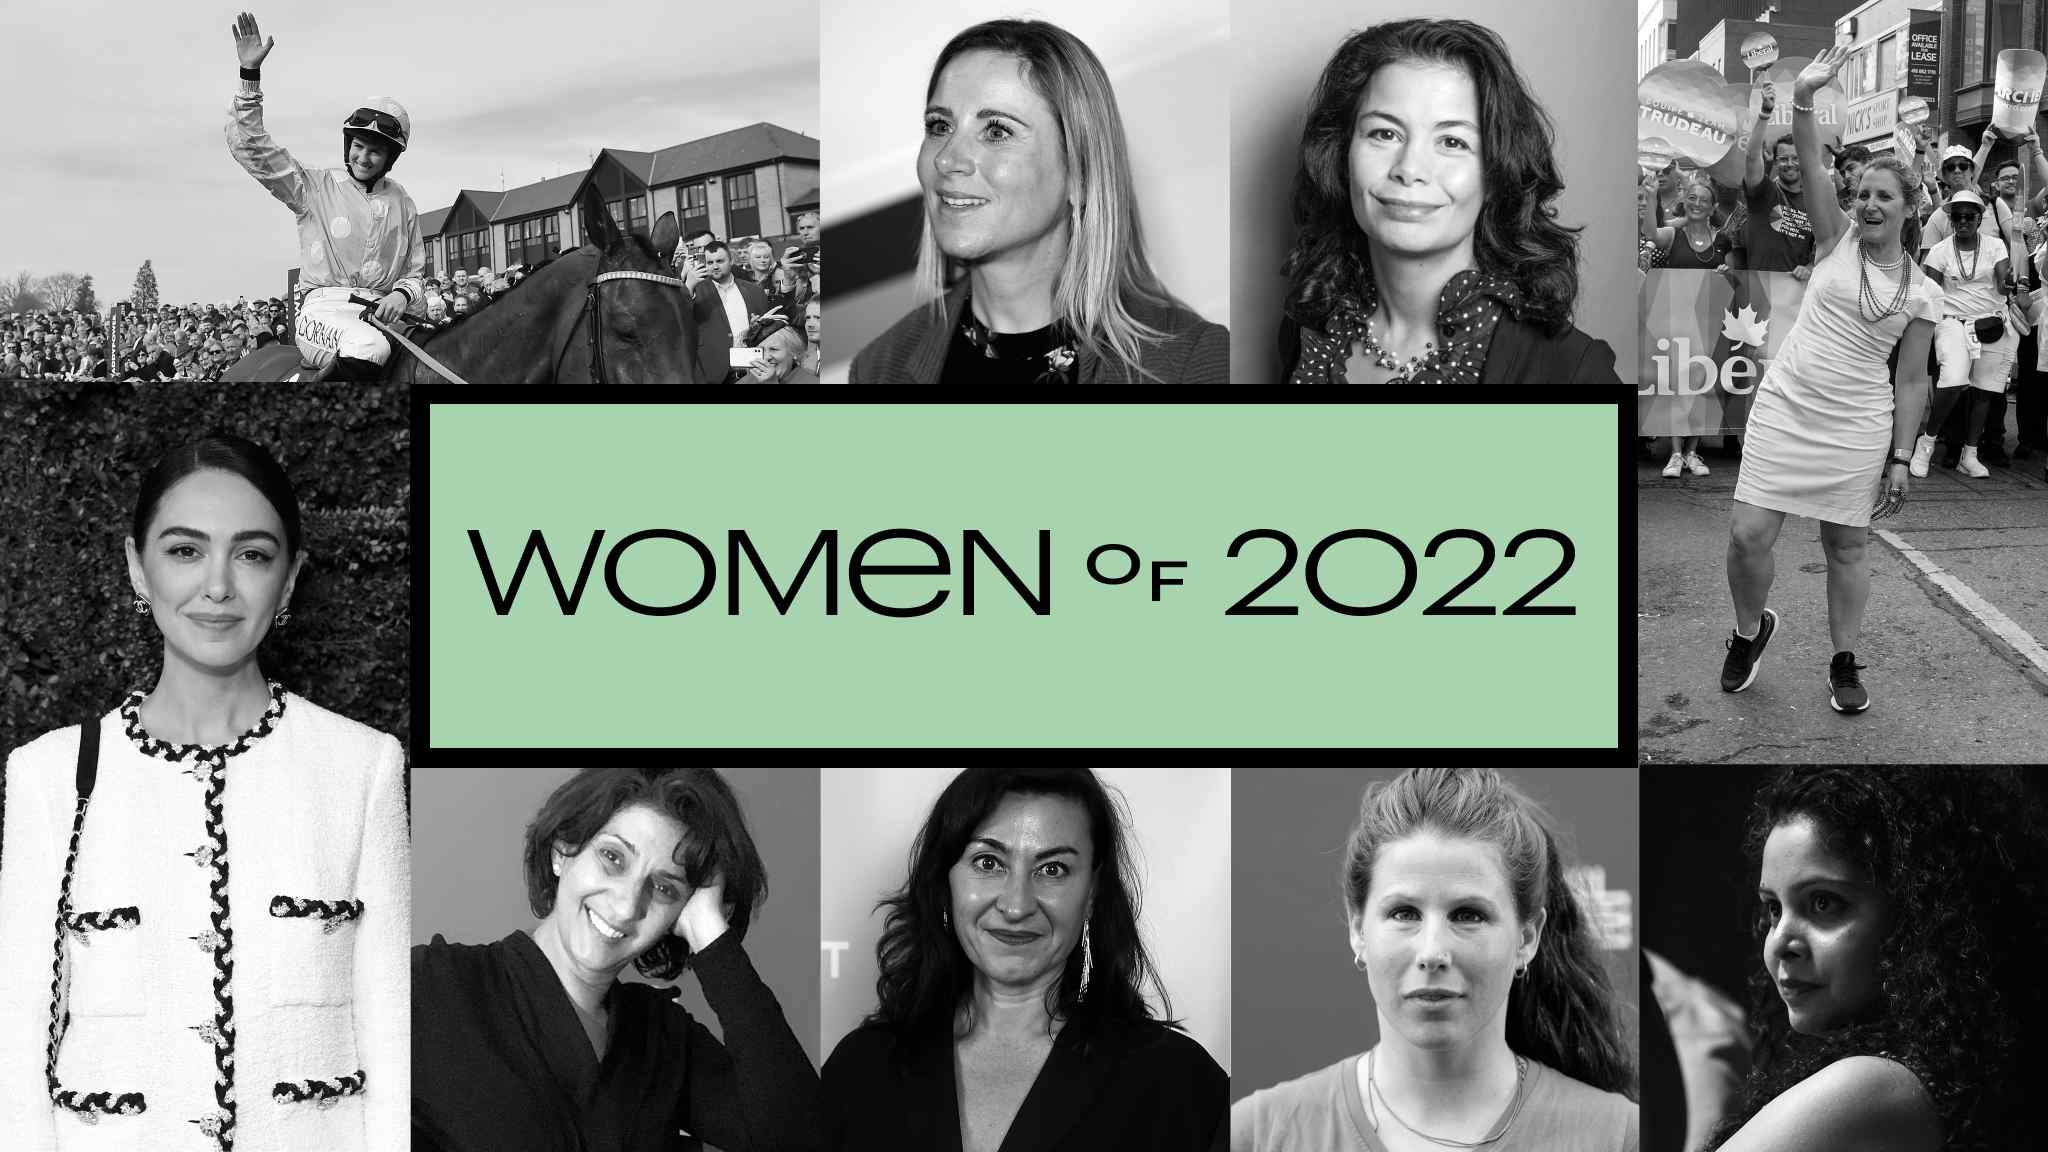 Your women of 2022 — FT readers respond